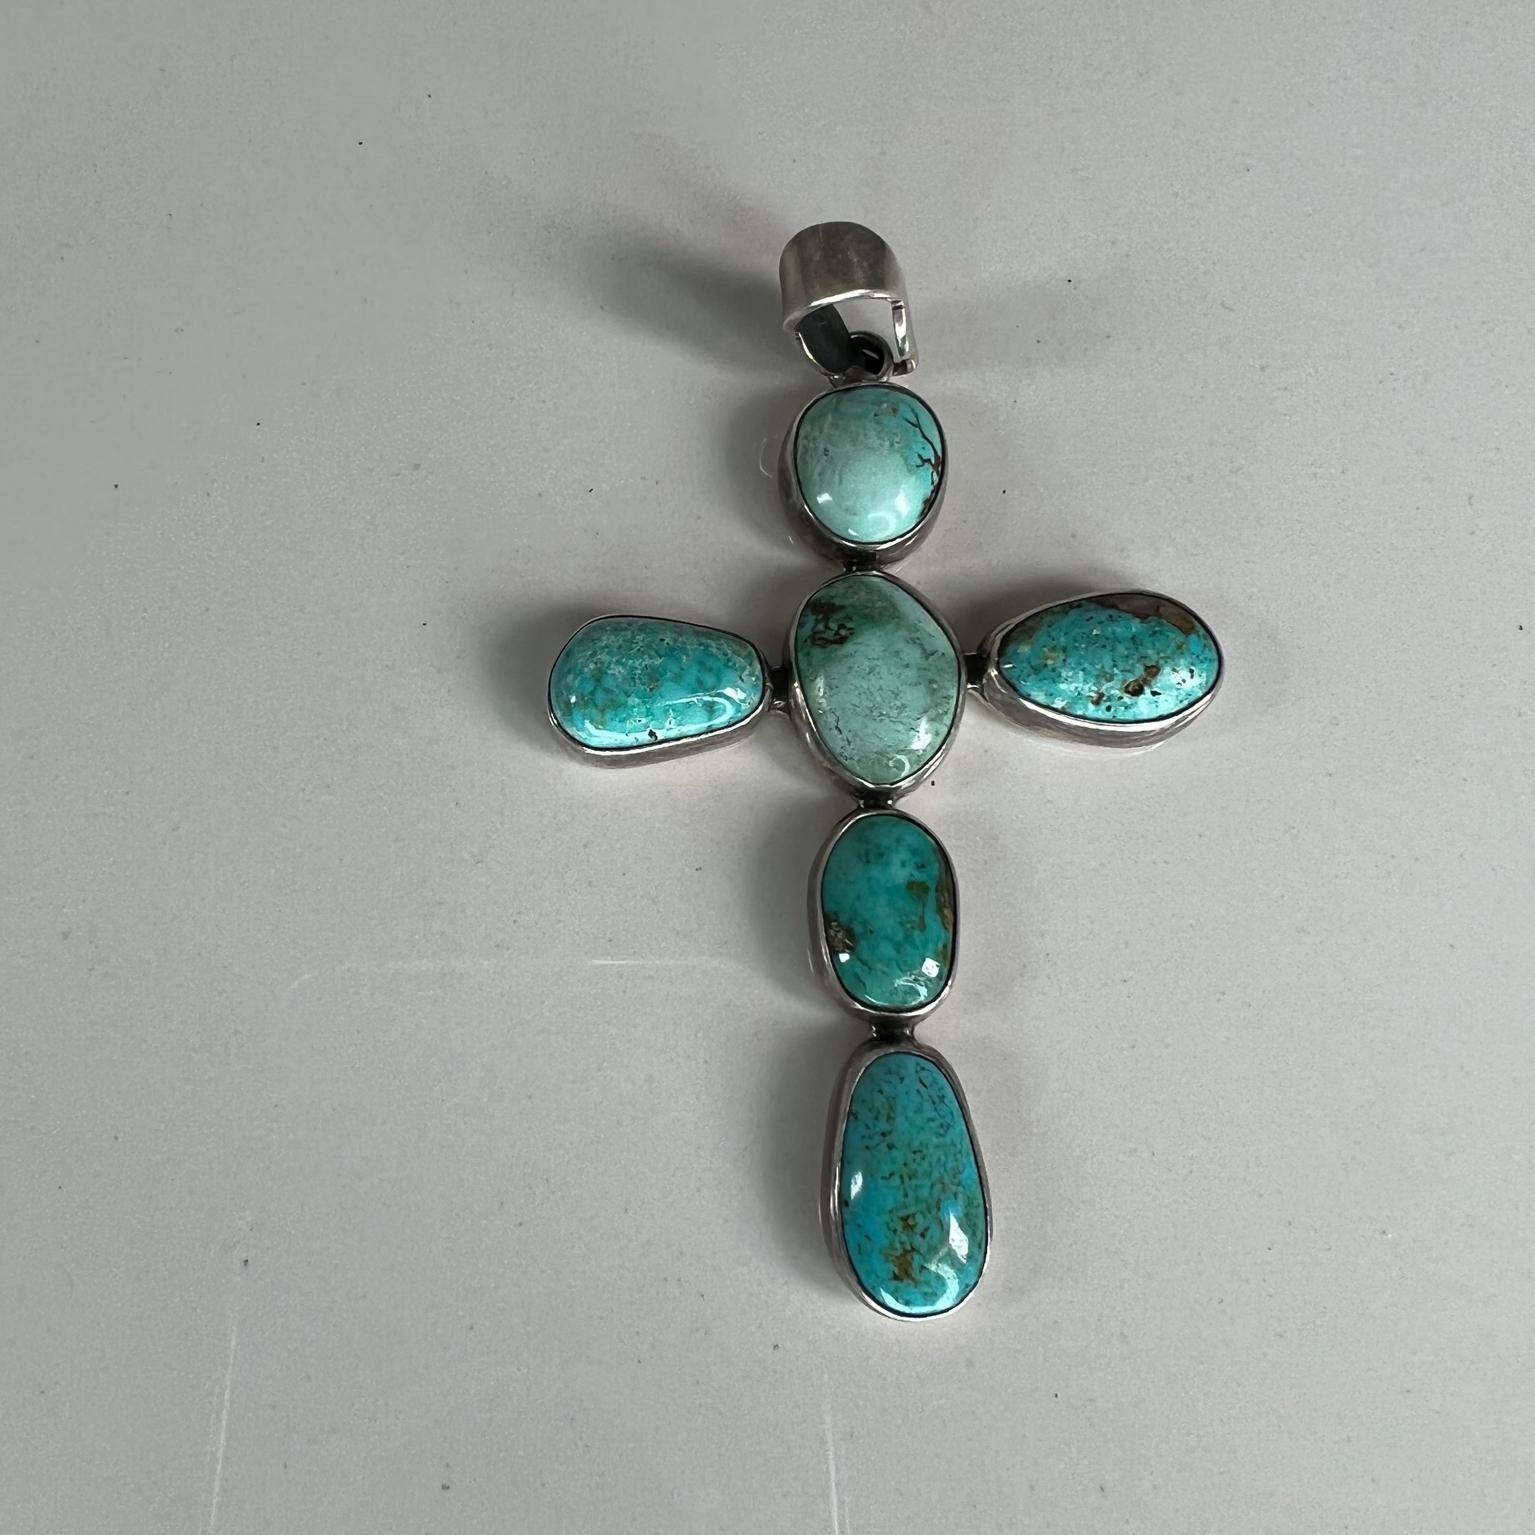 Vintage Navajo Southwestern sterling silver Turquoise cross pendant
Stamped sterling
Measures: 3.5 tall x 2 width x .19 thick
Preowned unrestored original vintage condition.
See images provided.
  